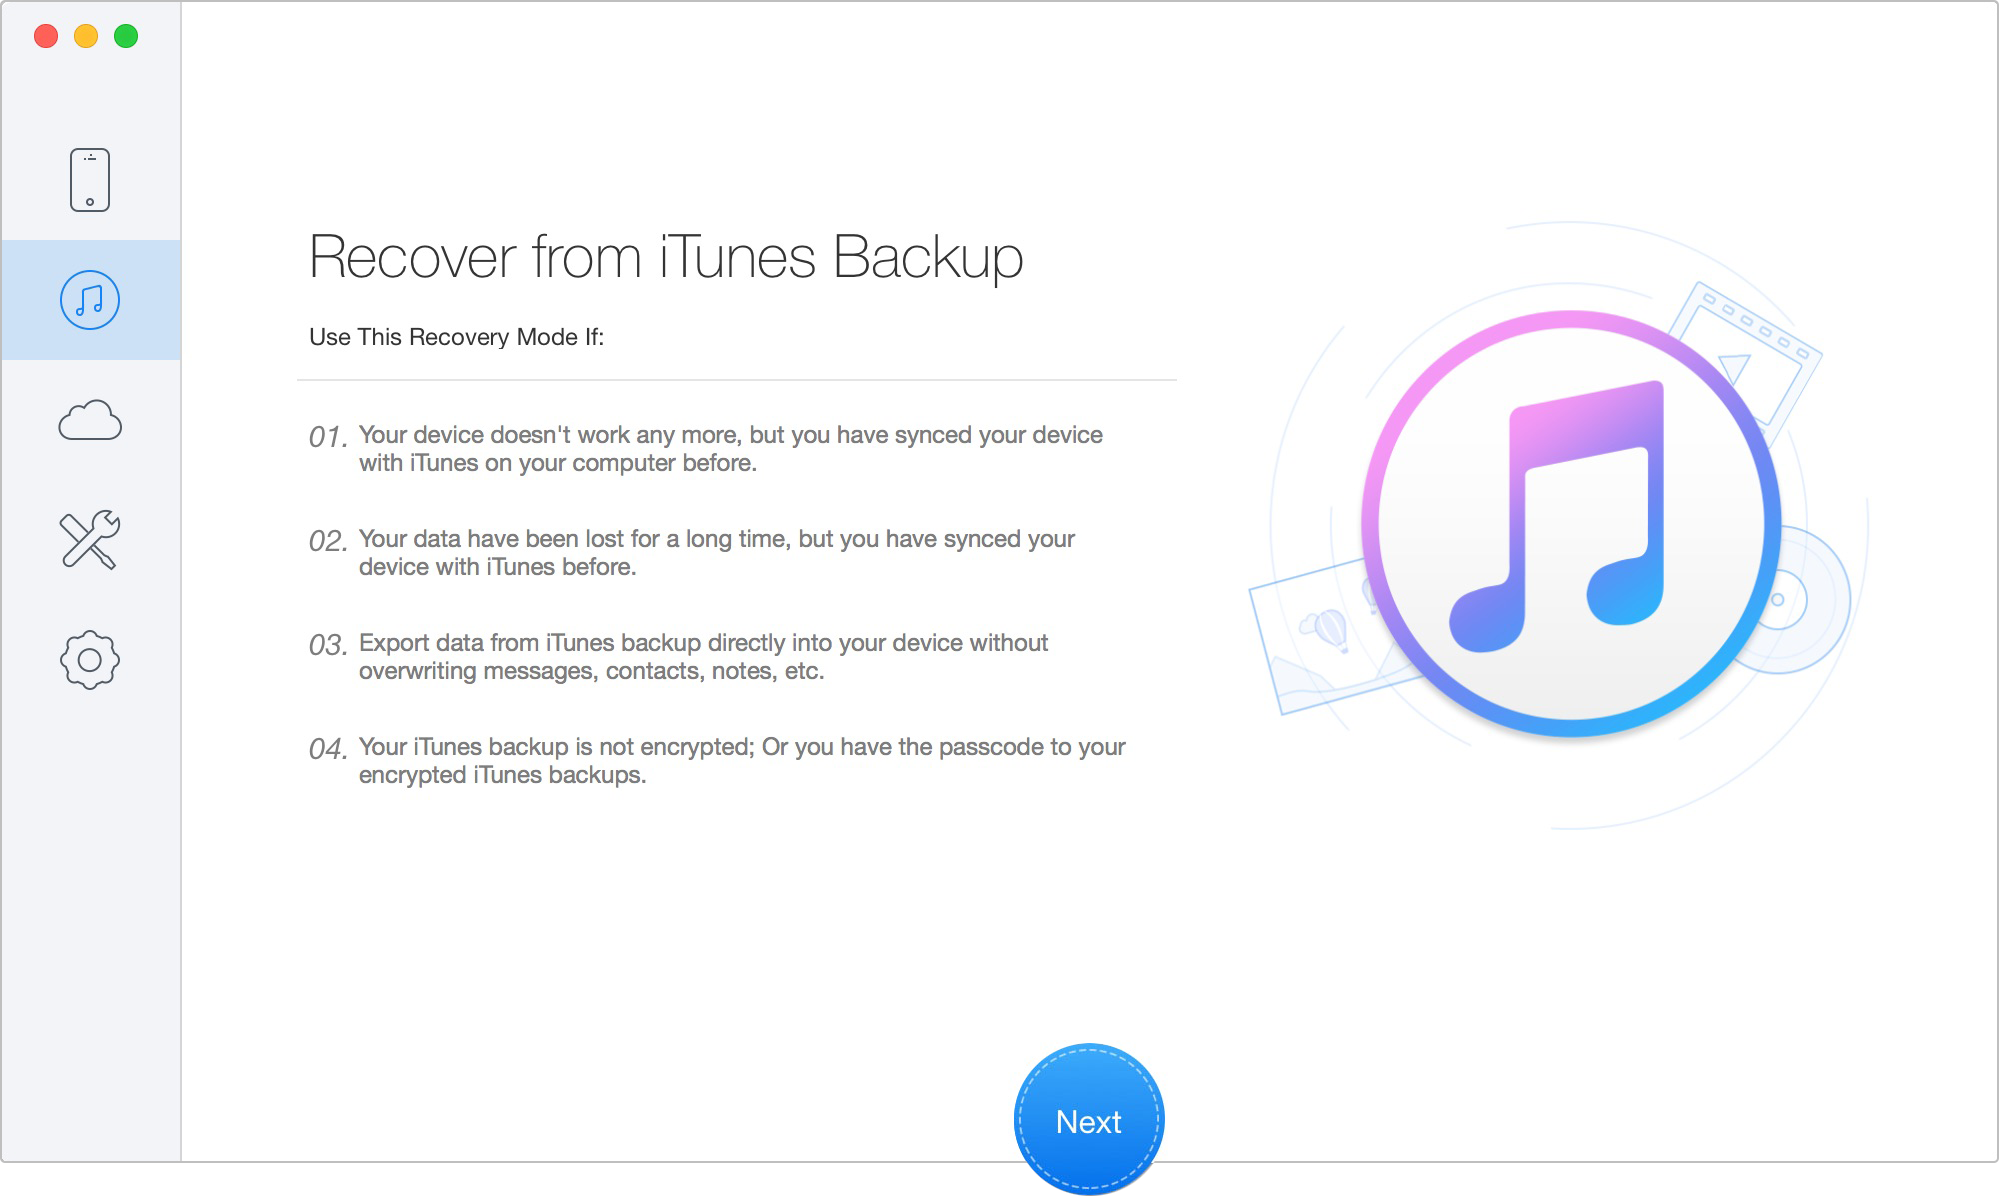 Choose Recover data from iTunes Backup Mode